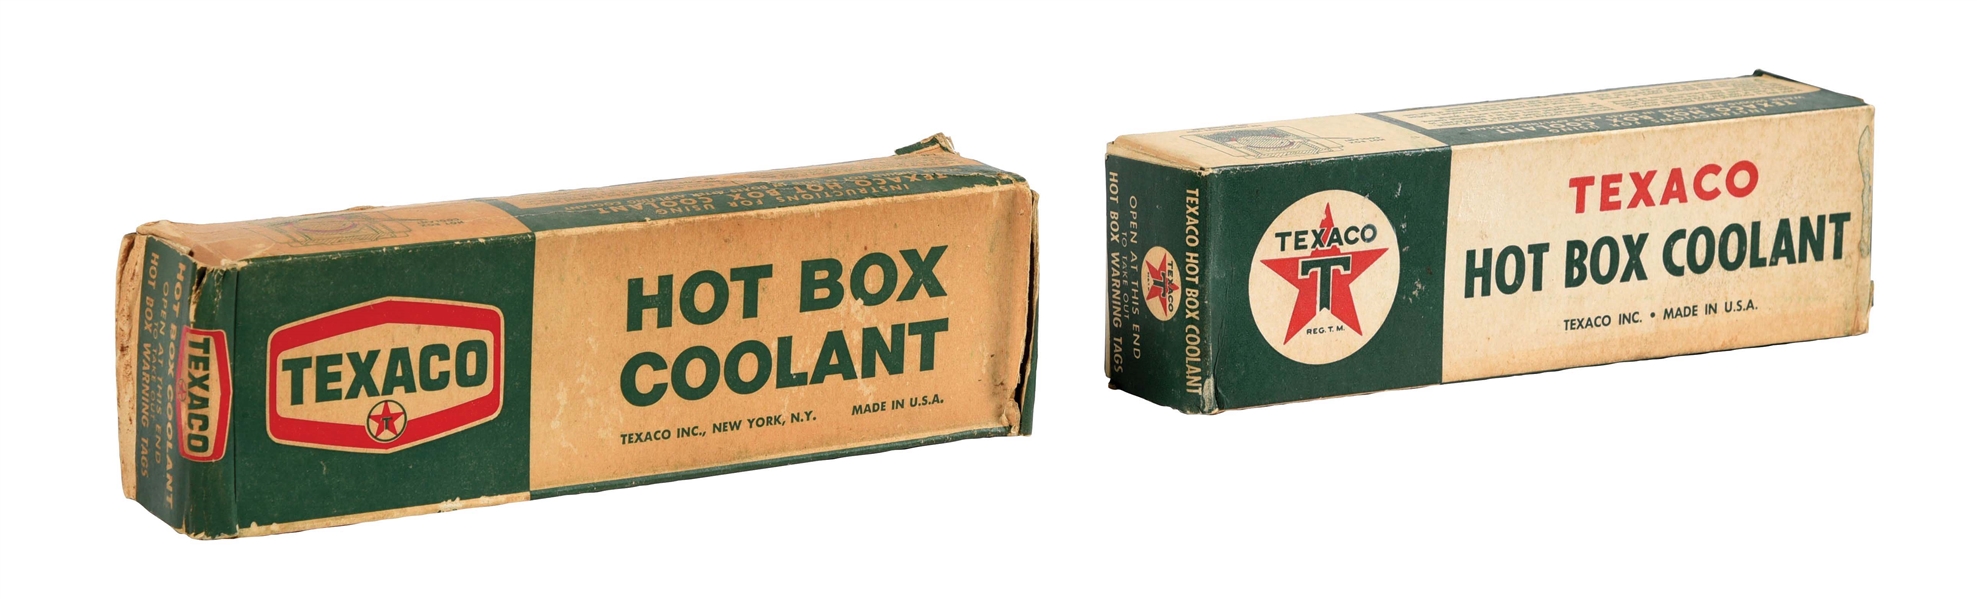 LOT OF 2: TEXACO HOT BOX COOLANT NEW OLD STOCK BOXES W/ PRODUCT. 